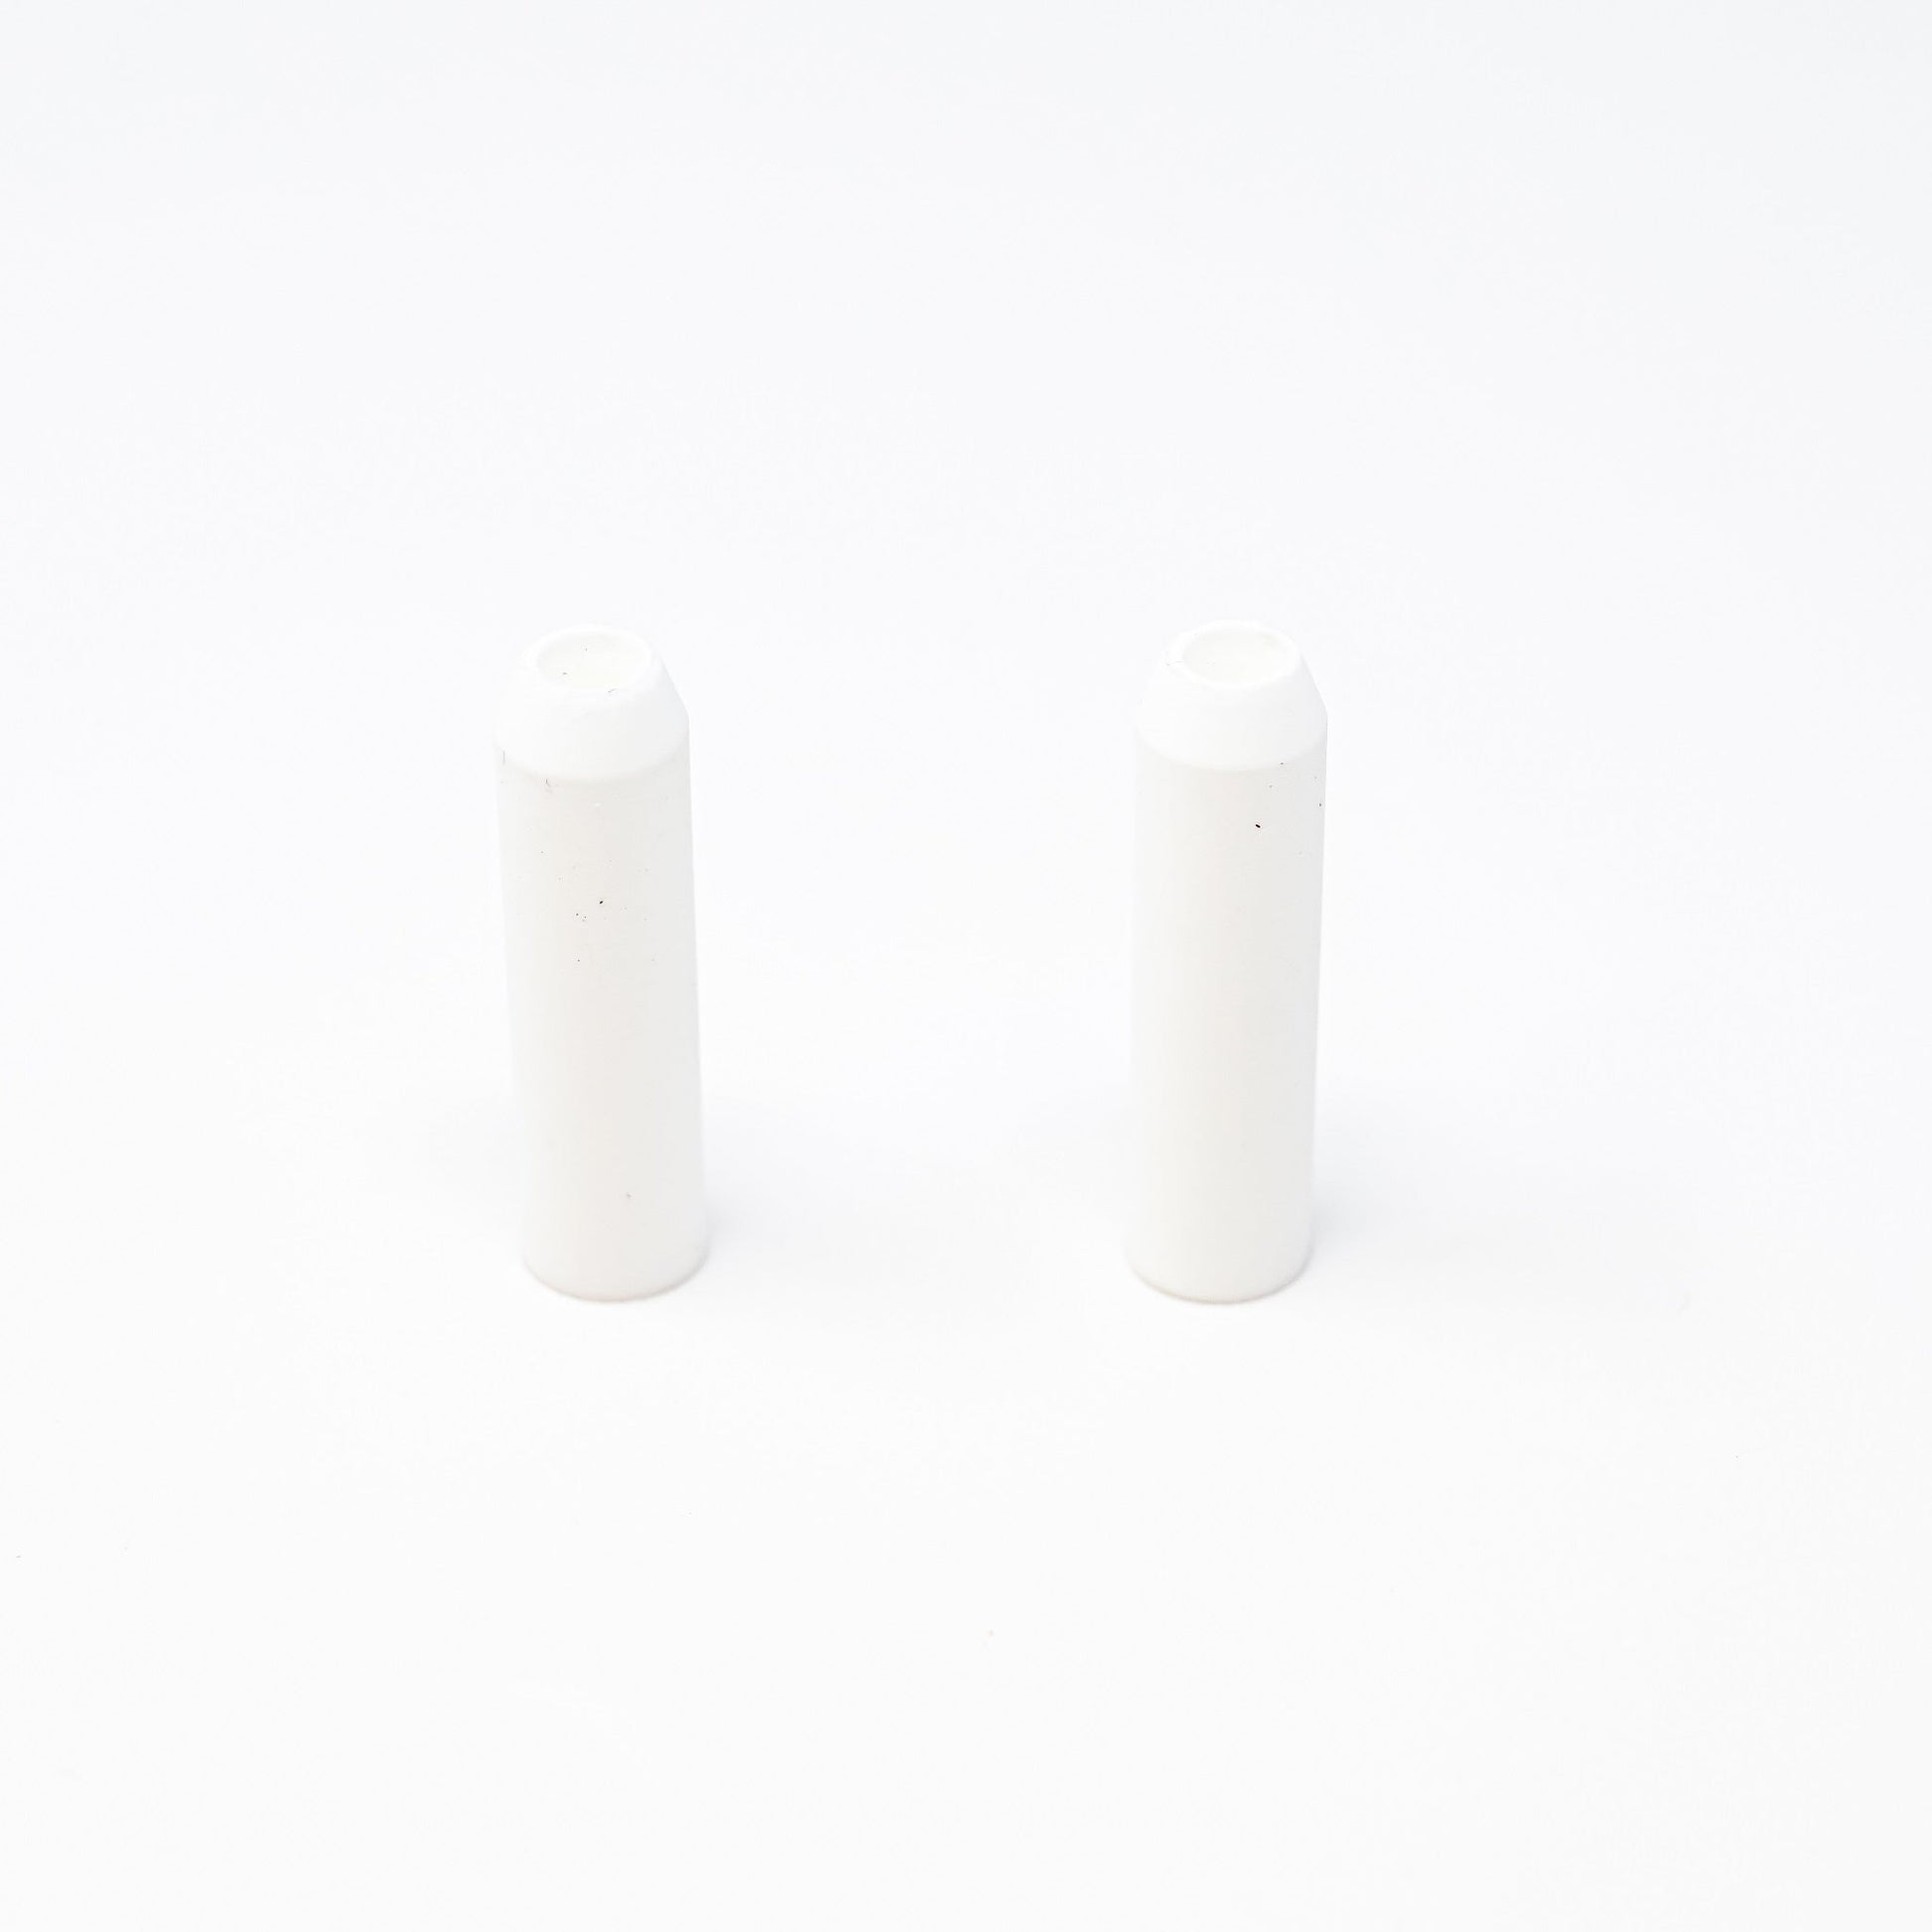 Hollow bullet shaped filters.